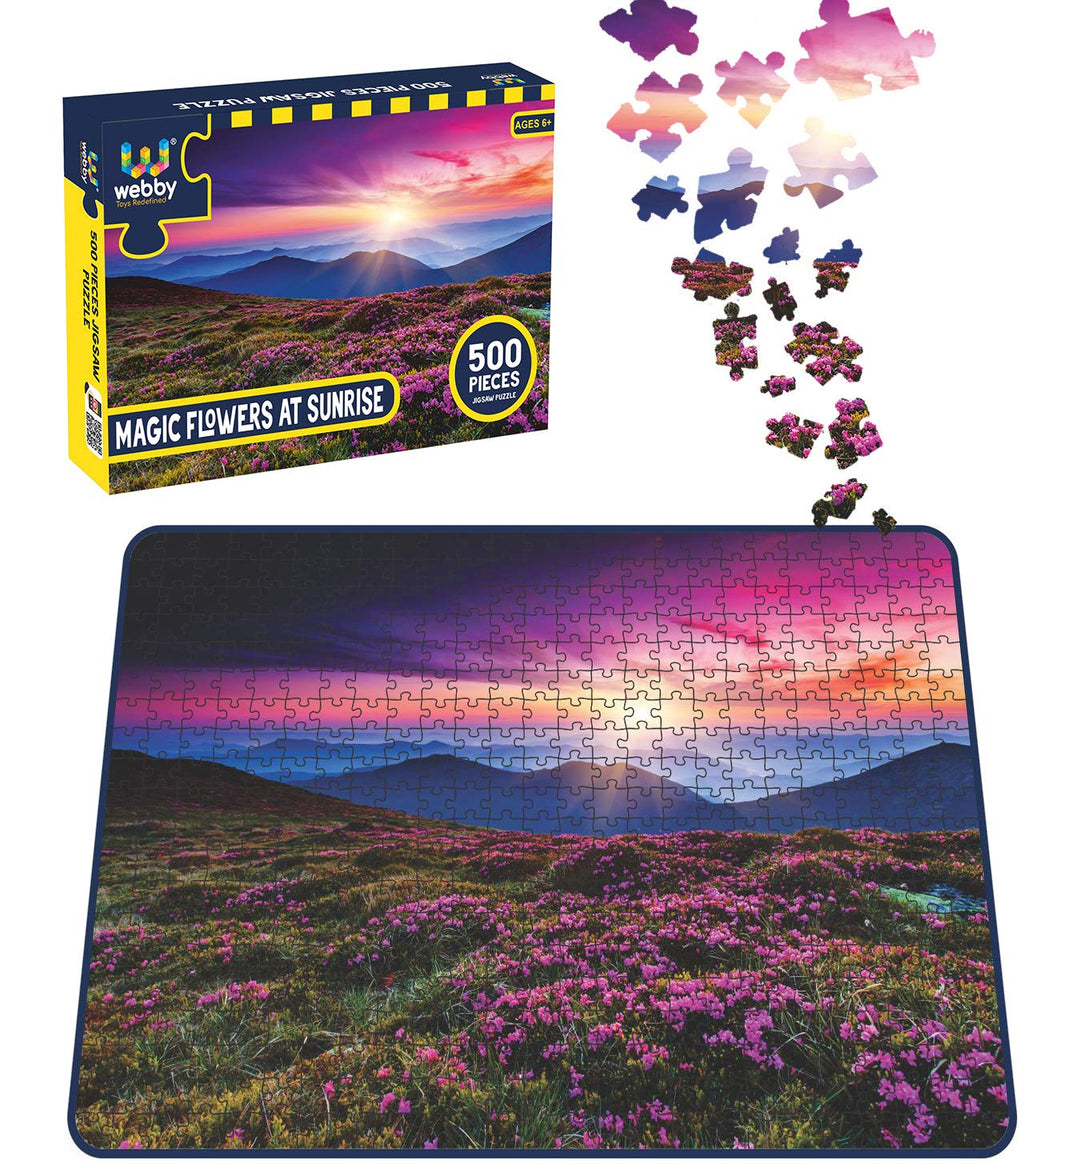 Webby Magic Flowers at Sunrise Wooden Jigsaw Puzzle, 500 pieces